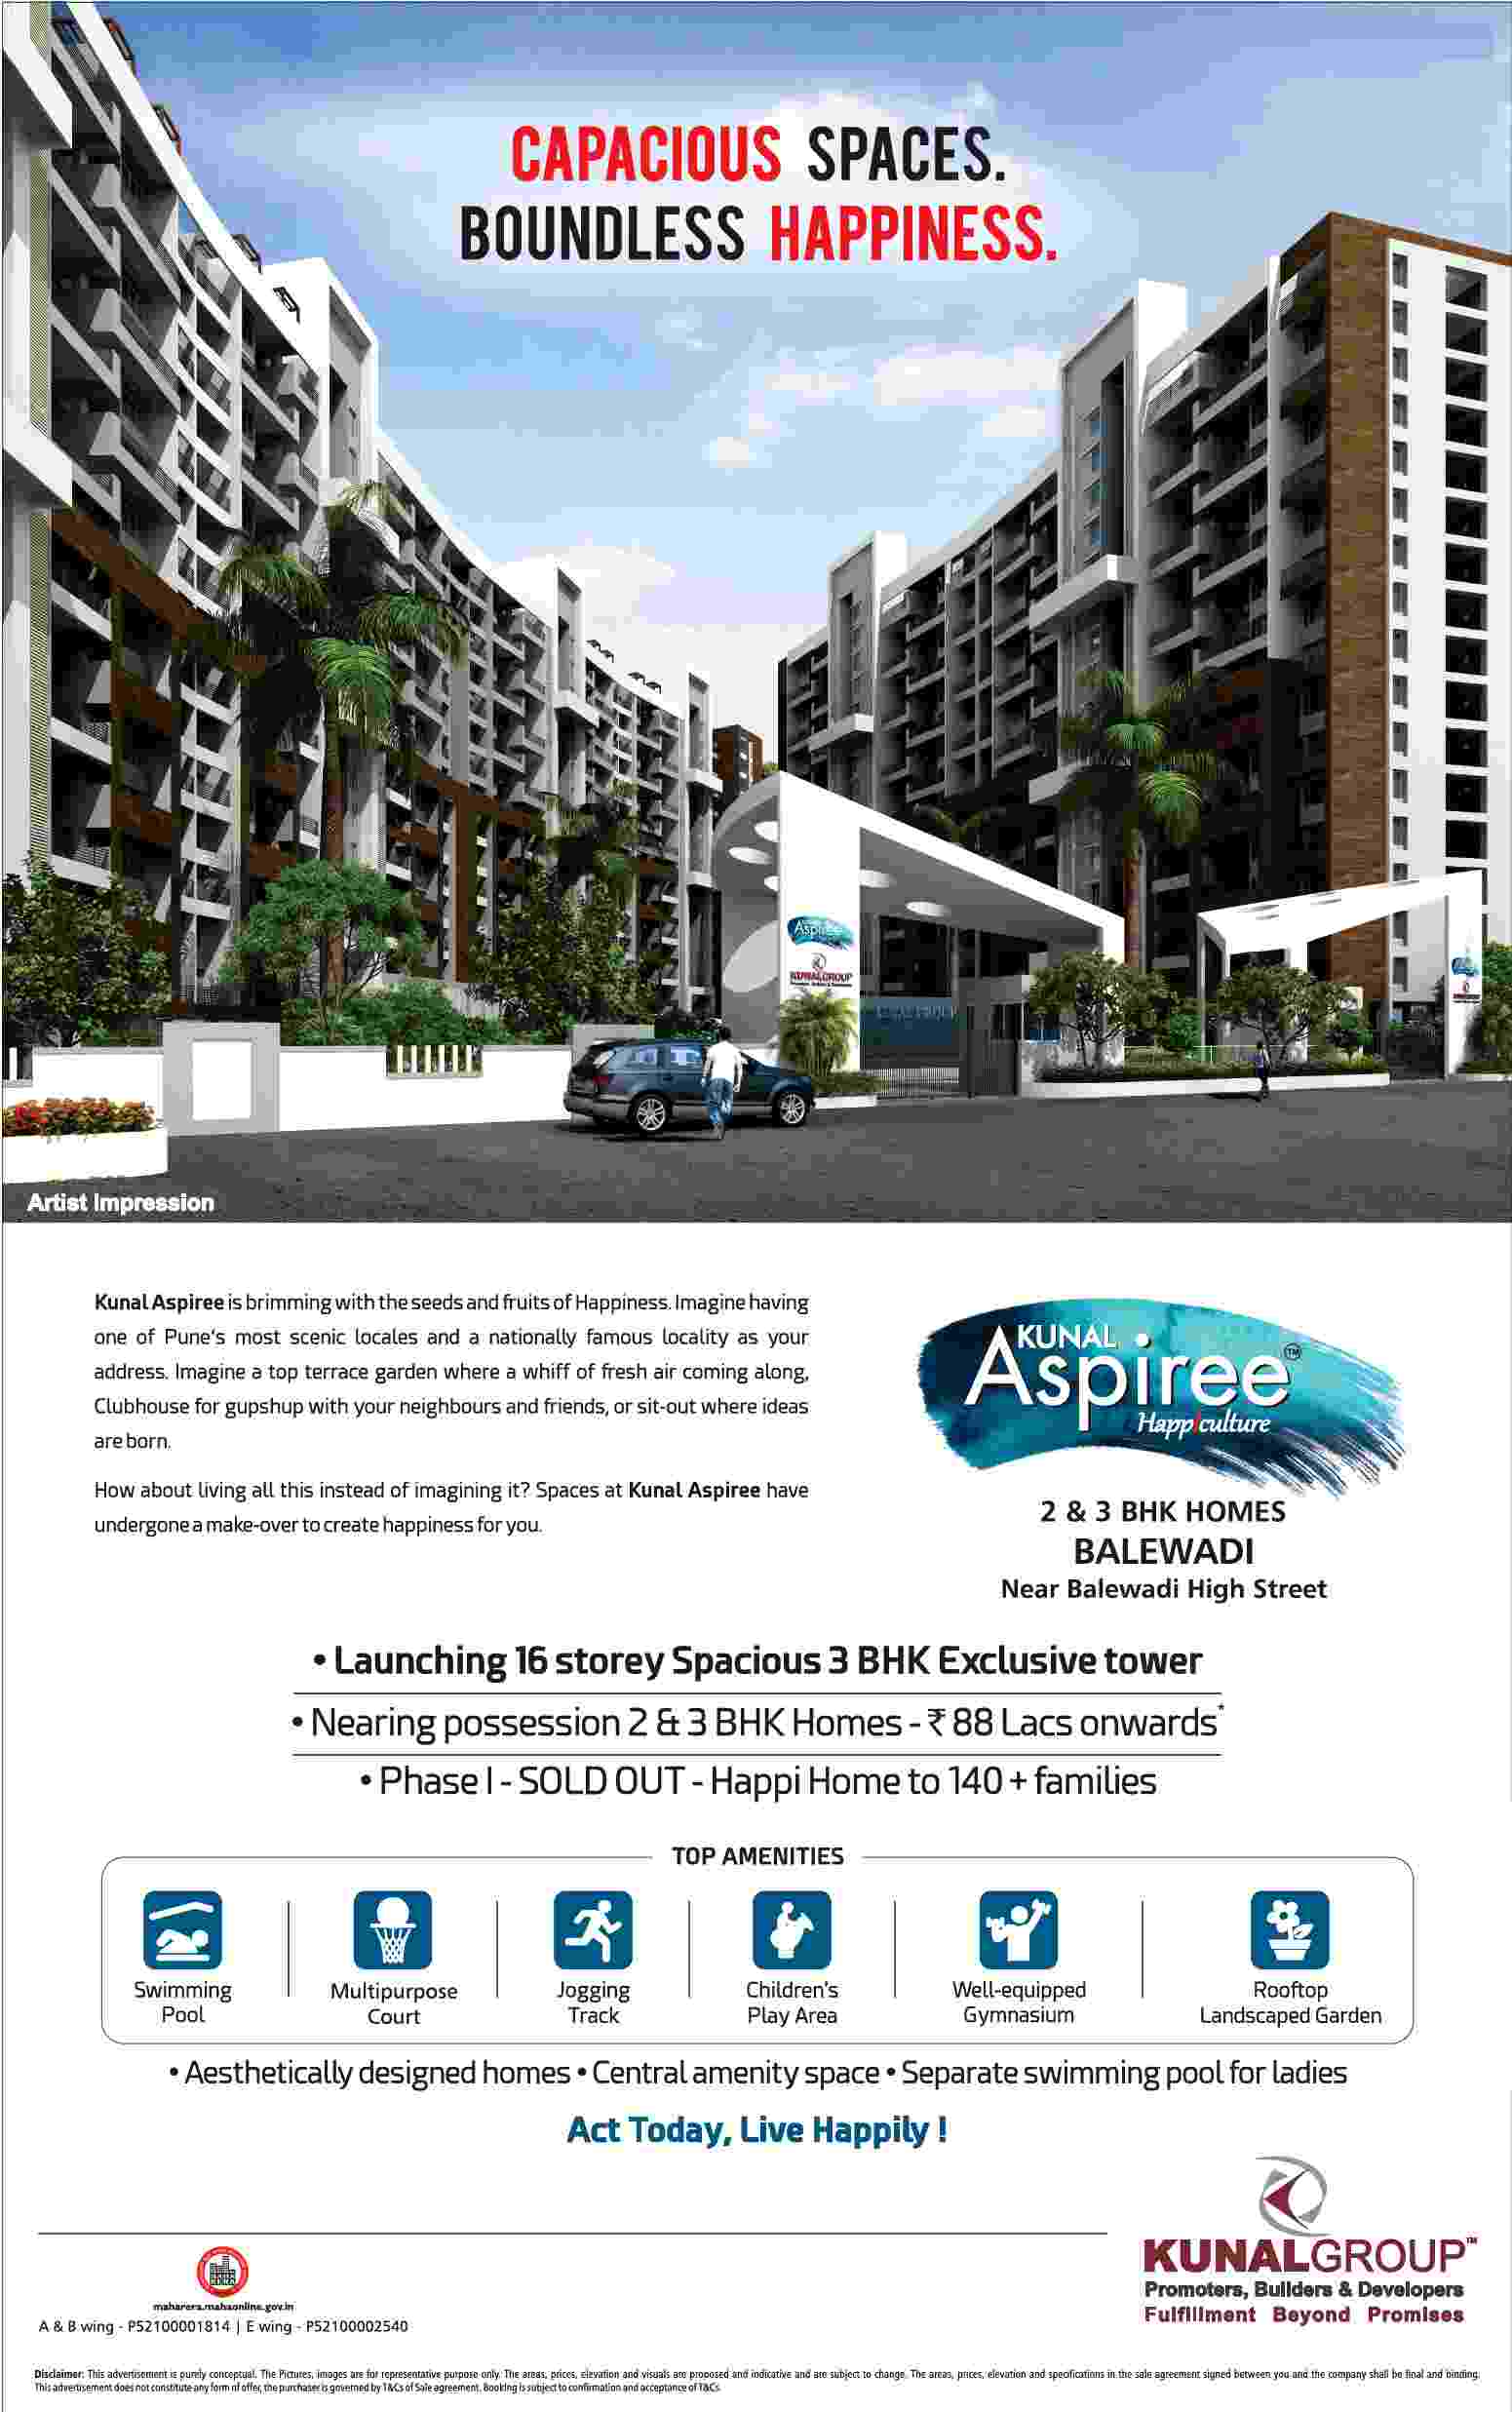 Kunal Aspiree nearing possession with 2 & 3 BHK homes in Pune